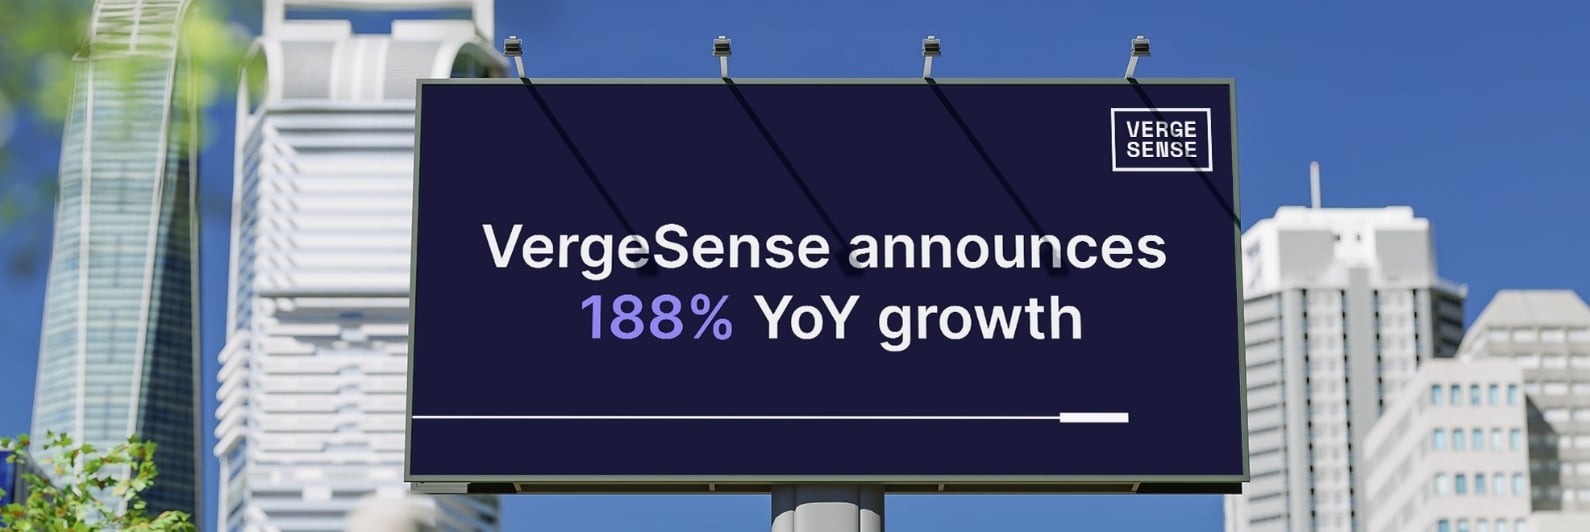 VergeSense Registers Another Historic Year of Growth and Market Expansion